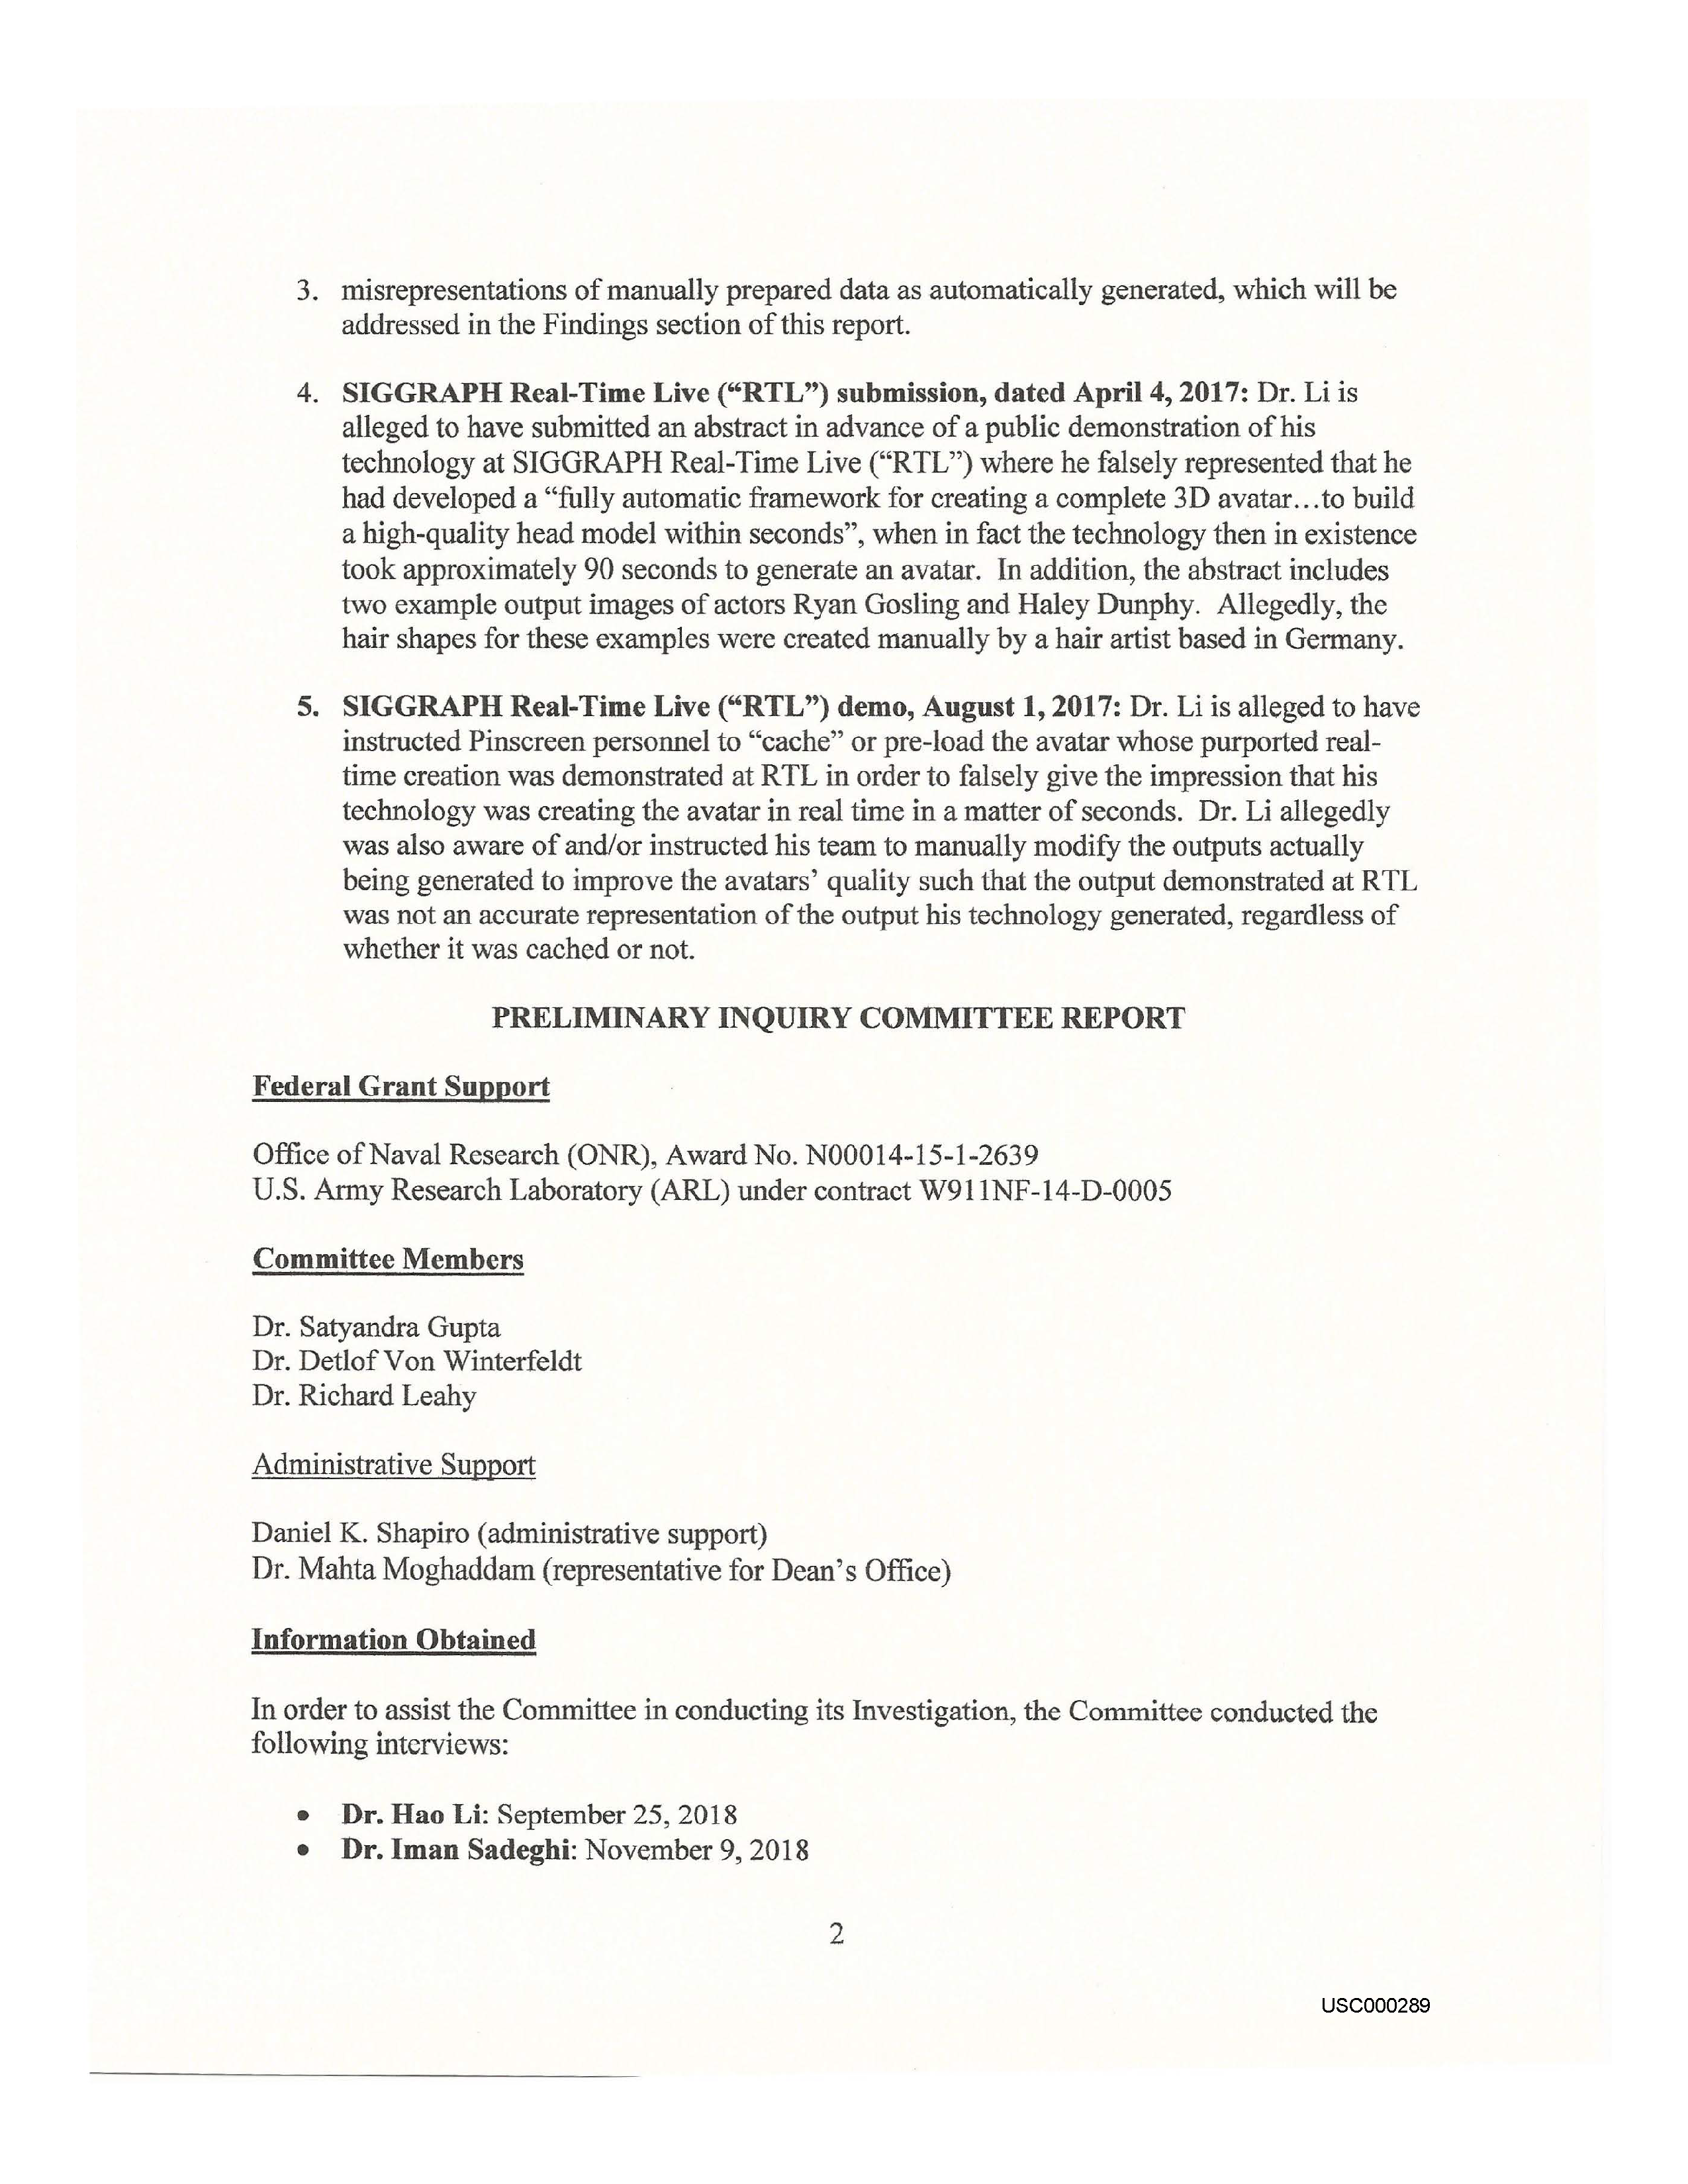 USC's Investigation Report re Hao Li's and Pinscreen's Scientific Misconduct at ACM SIGGRAPH RTL 2017 - Summary Page 19